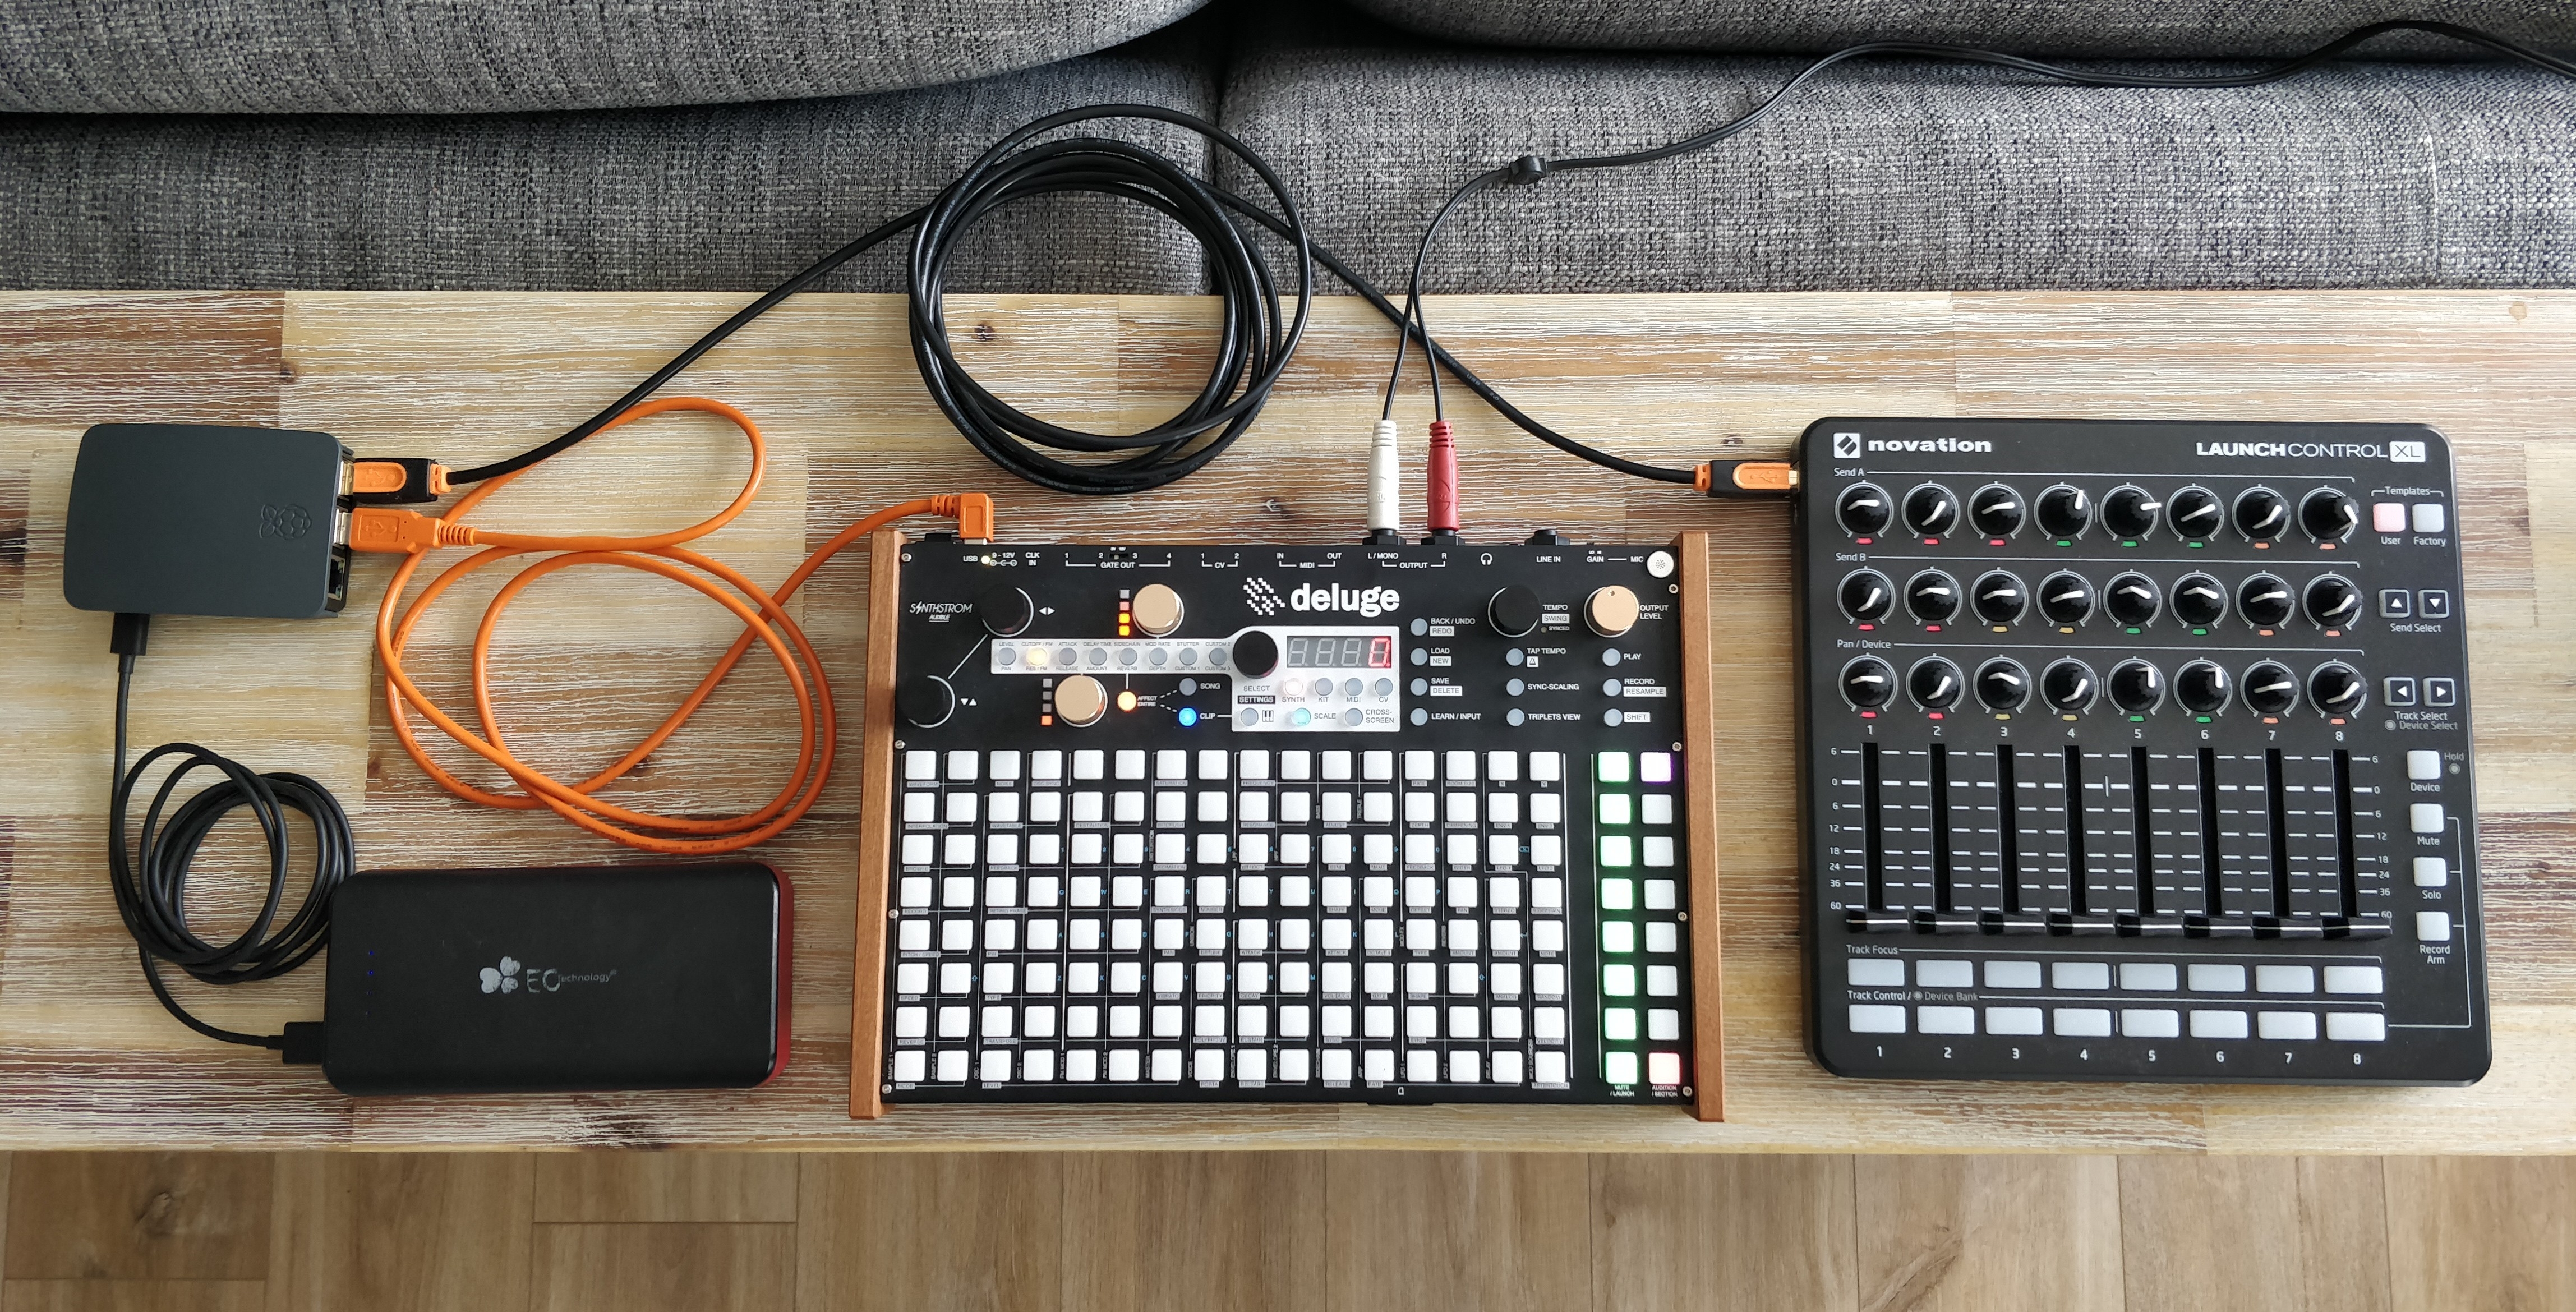 How to connect Novation LaunchControl XL — Synthstrom Audible